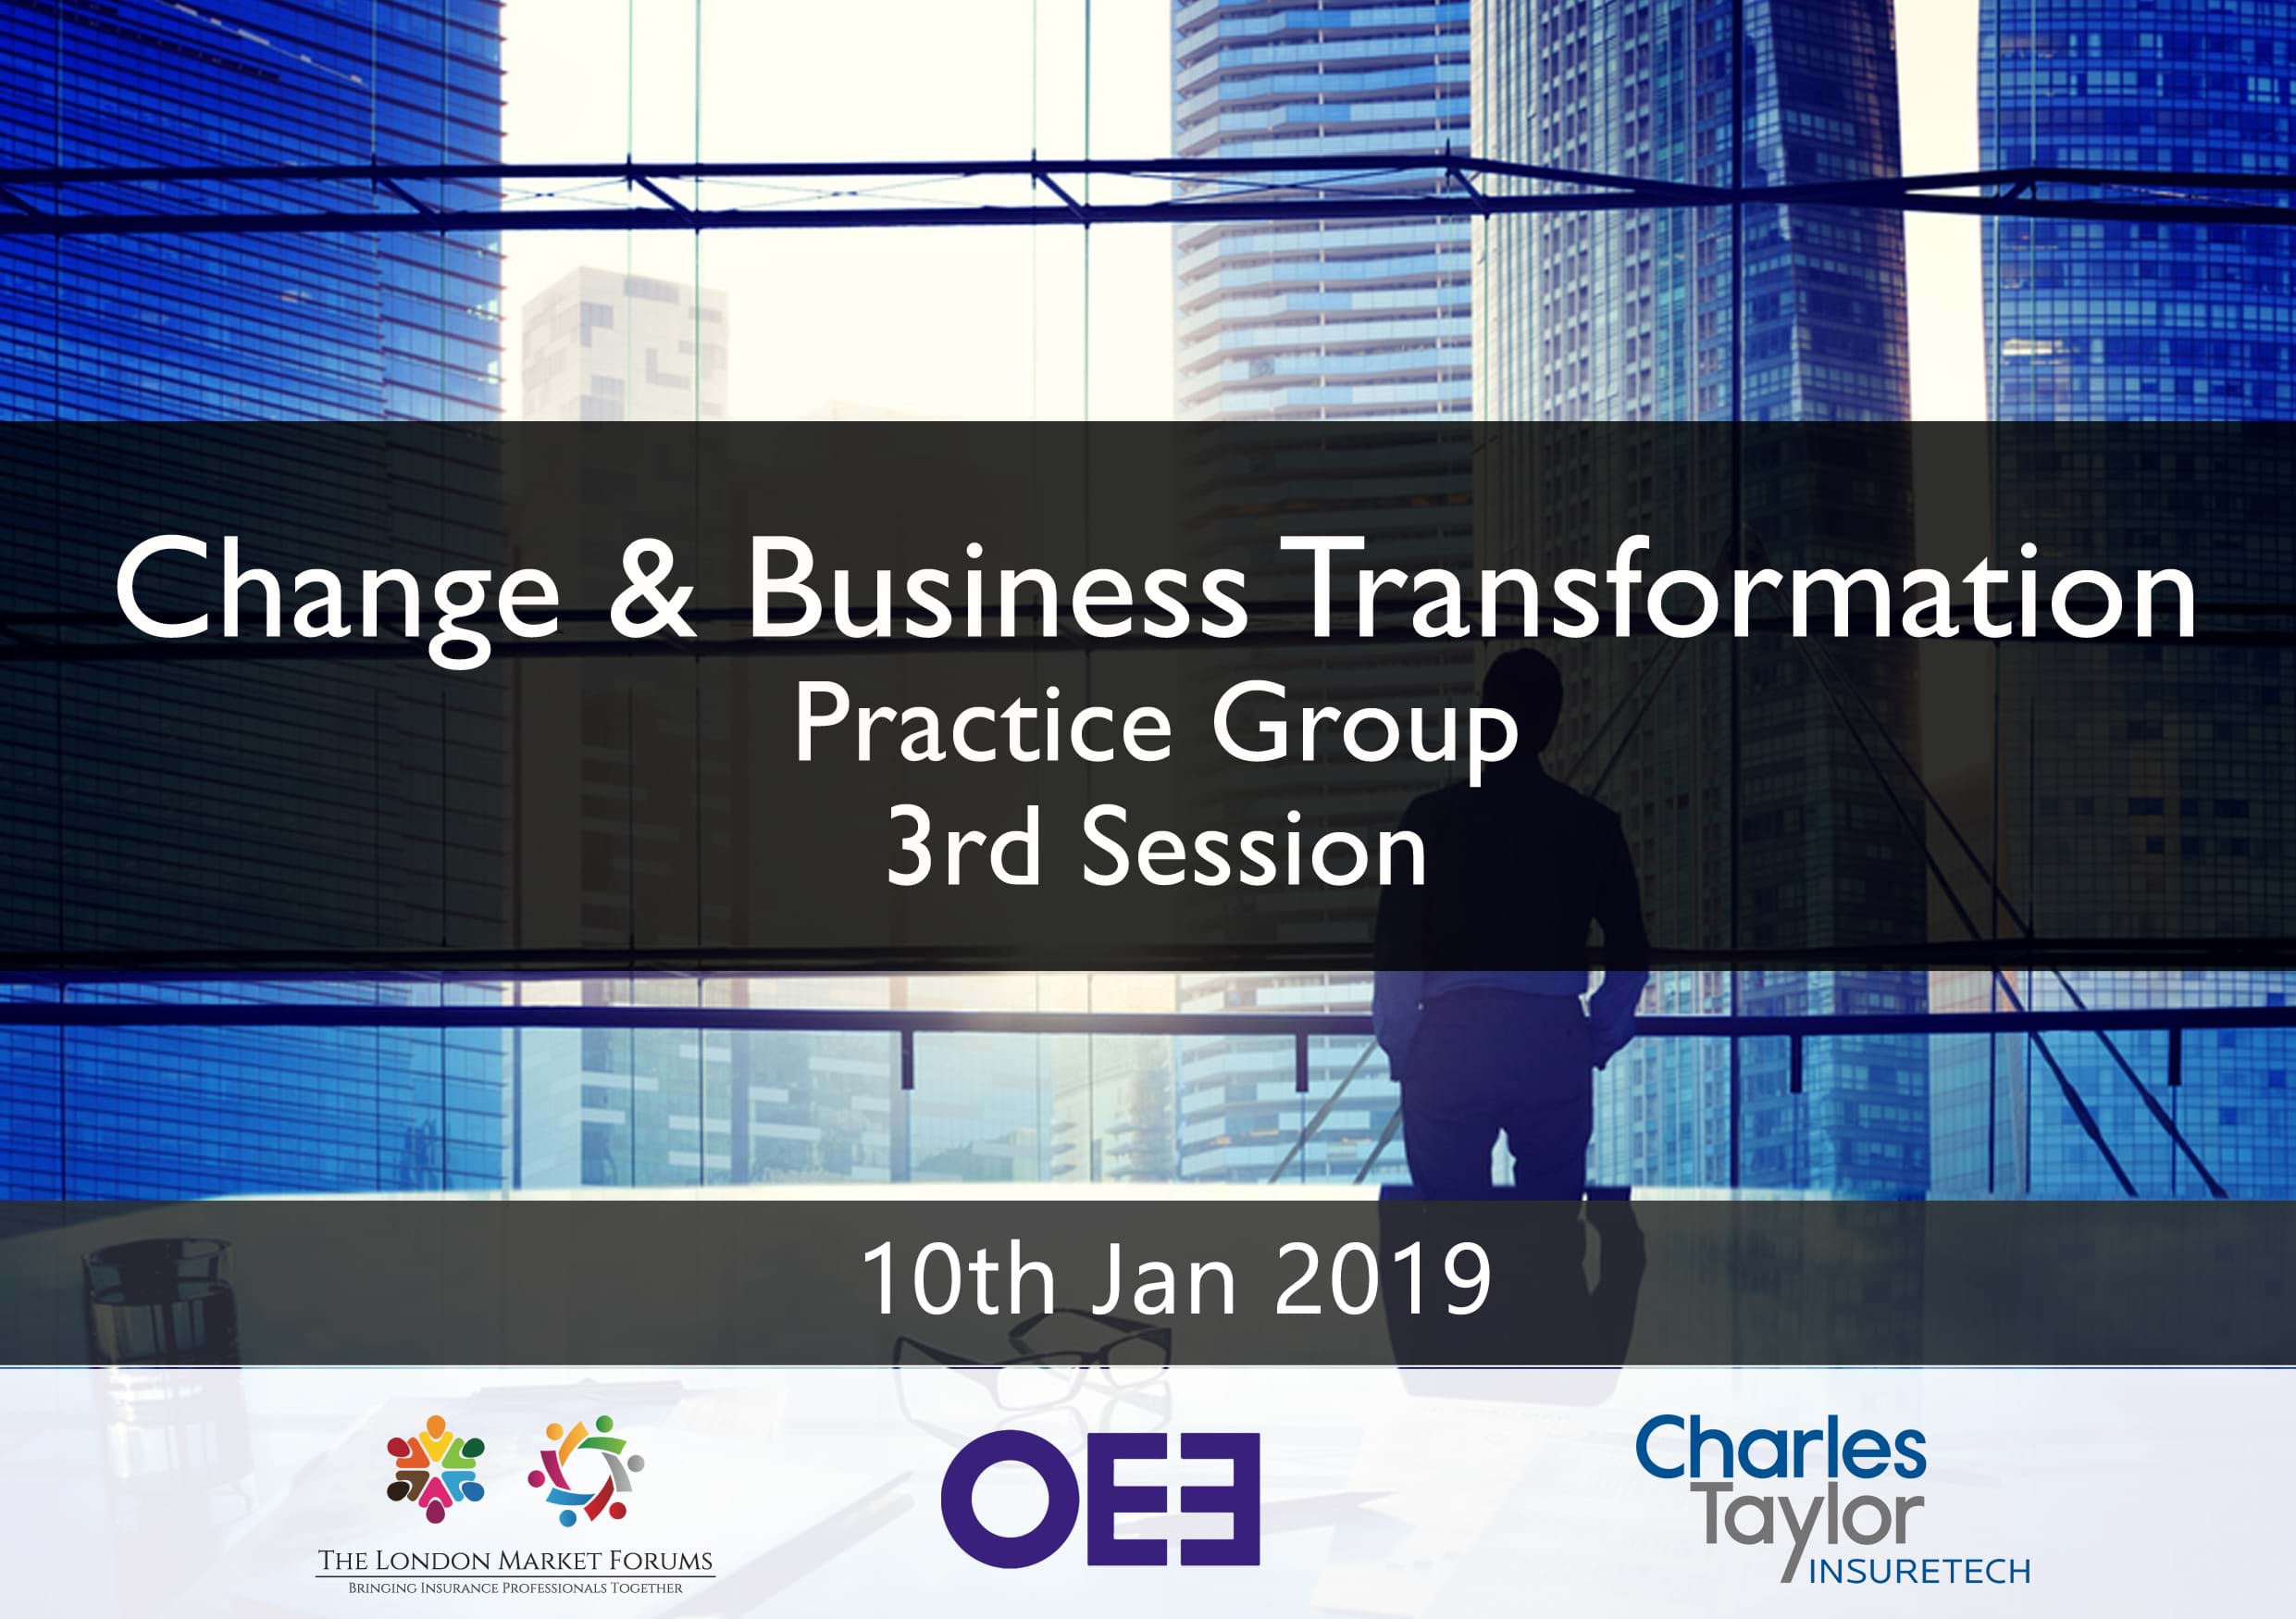 Change & Business Transformation Practice Group - 3rd Session